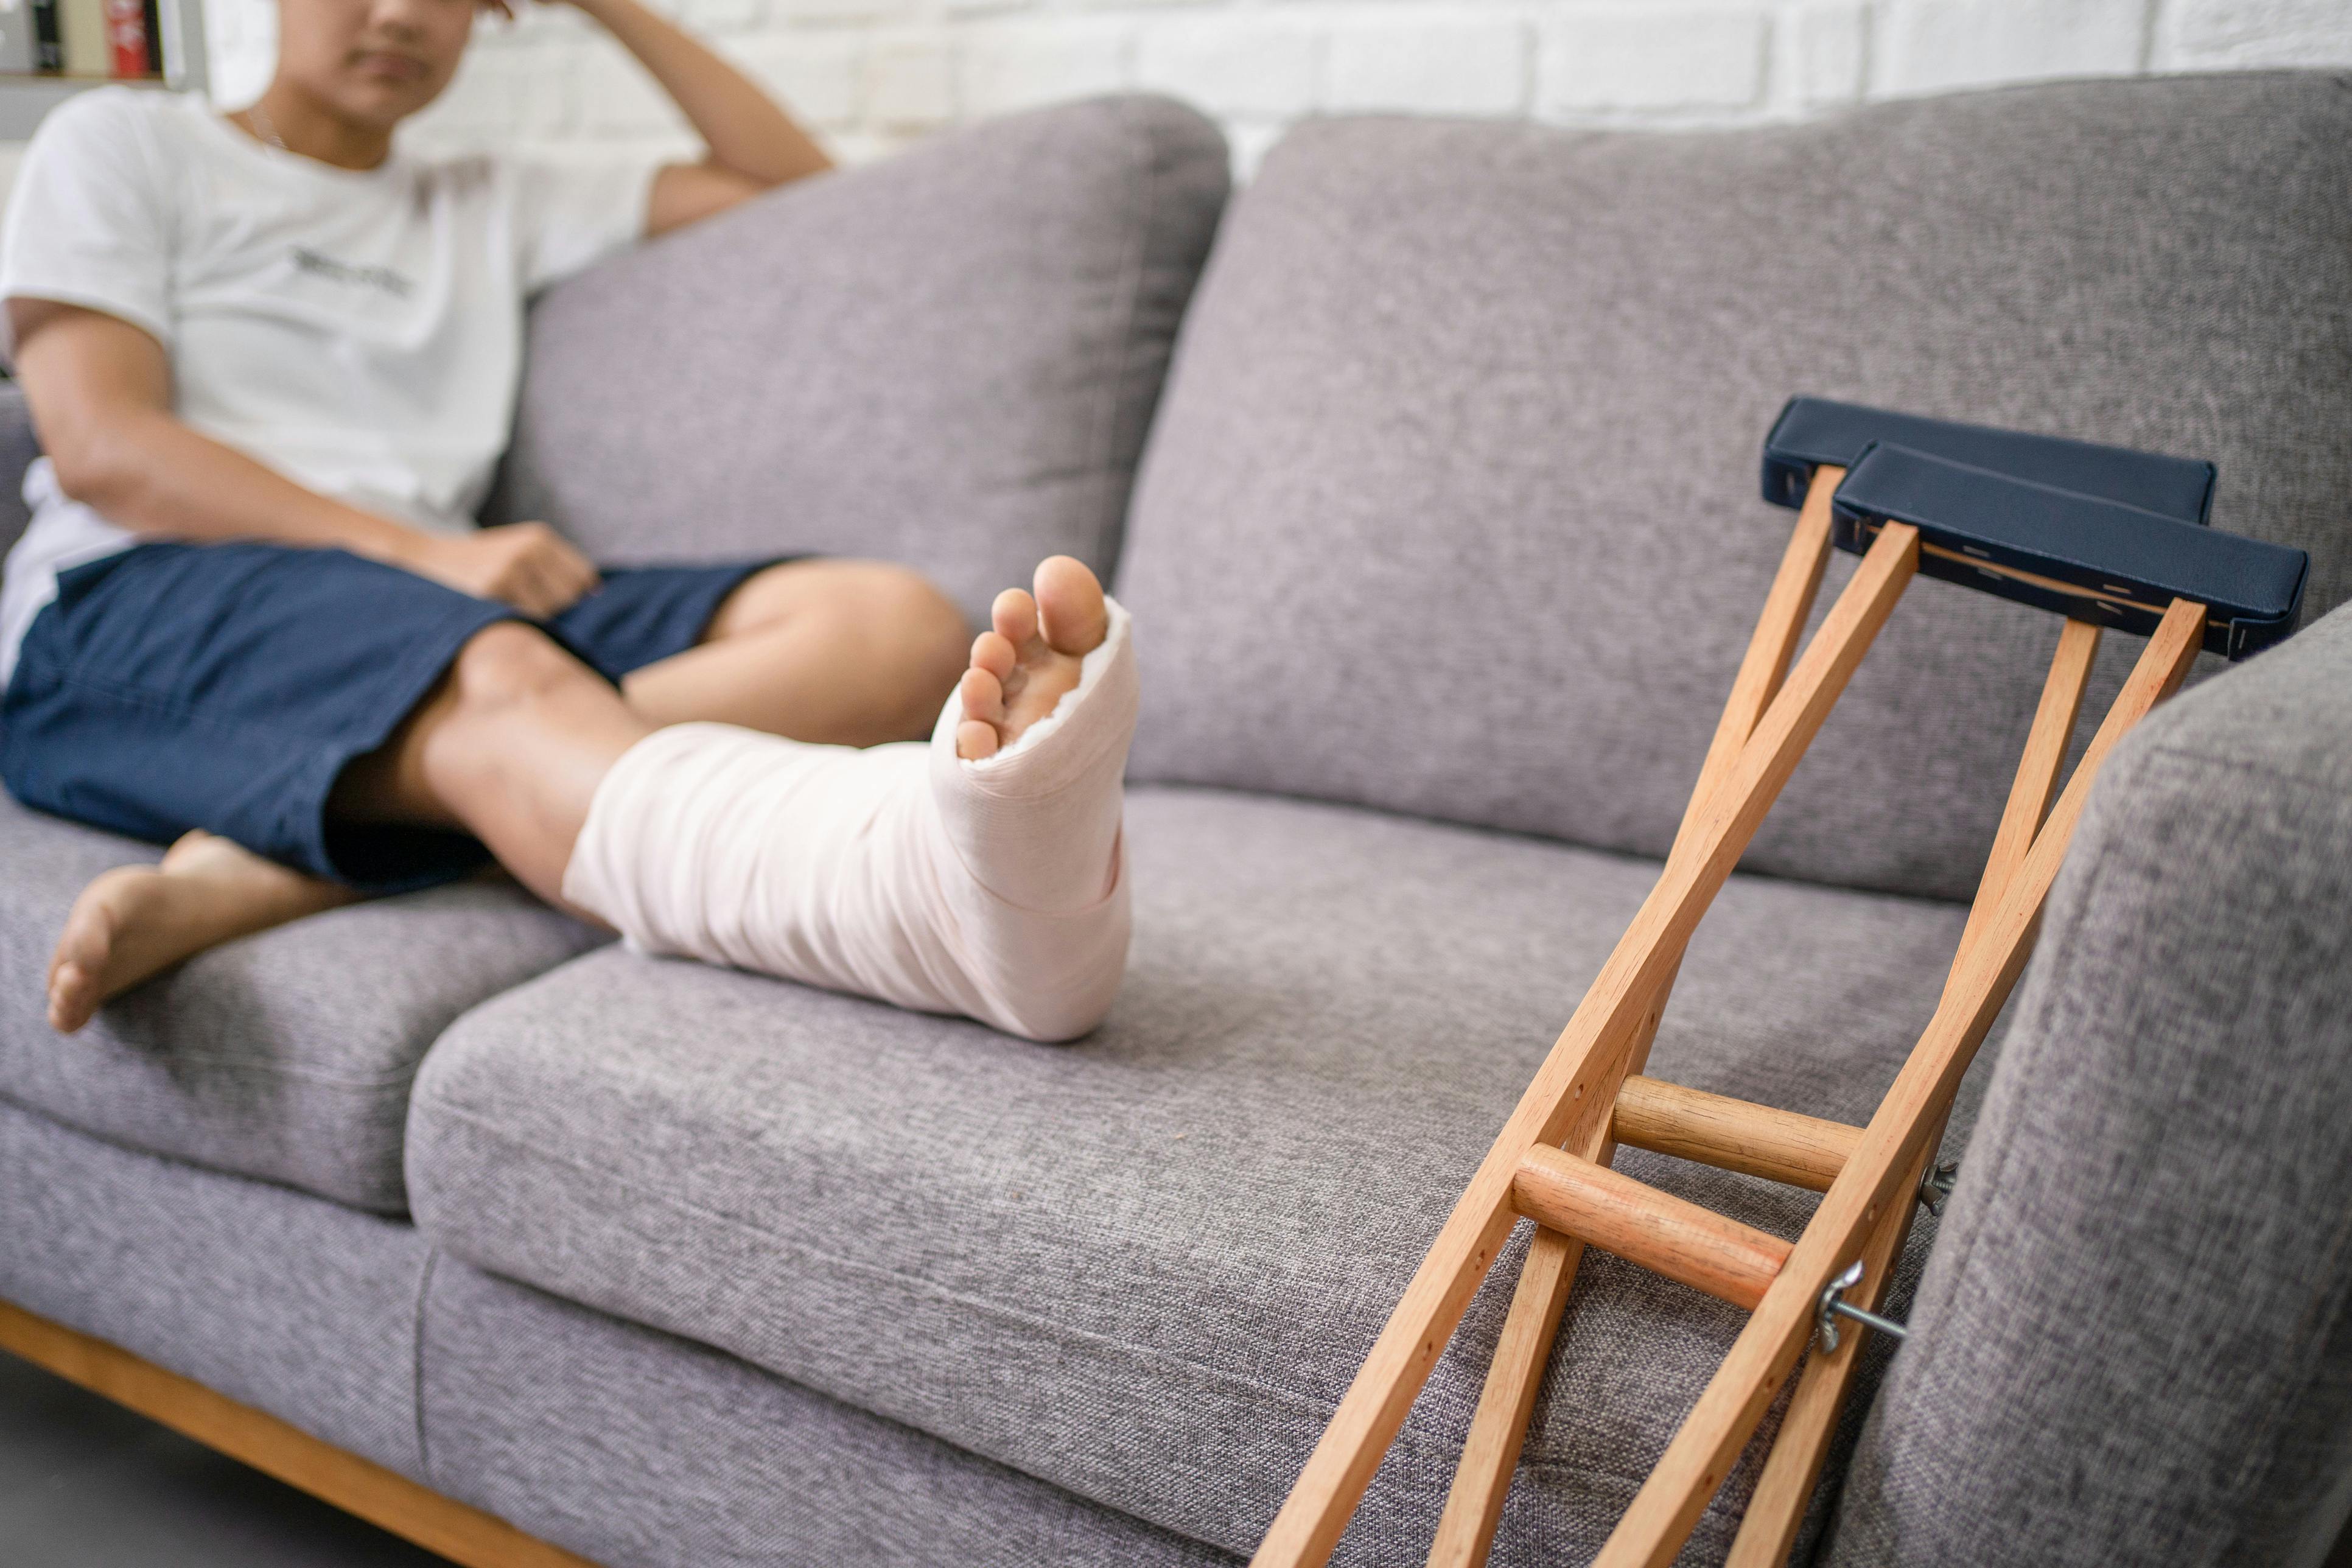 Woman sitting on the couch with a broken foot